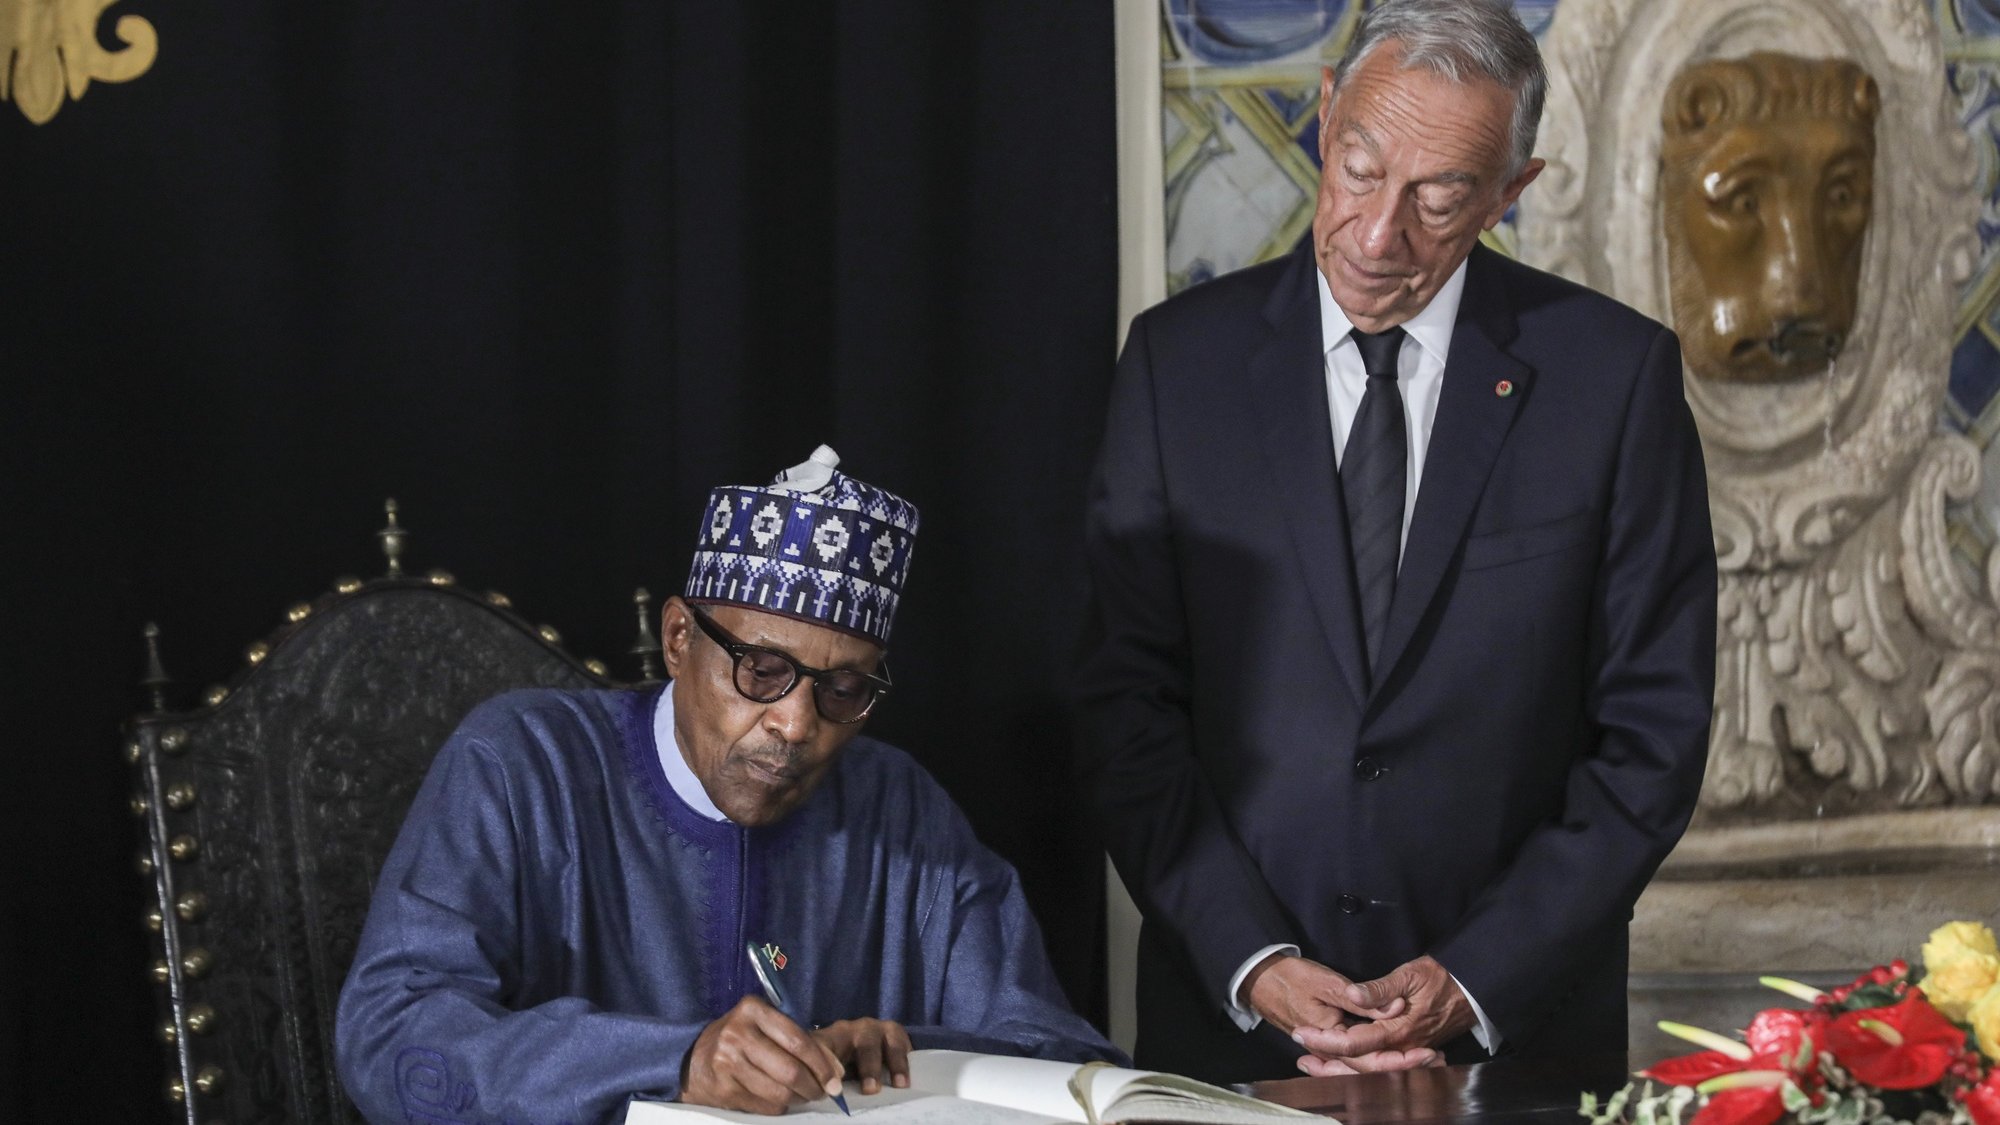 Portugal&#039;s President Marcelo Rebelo de Sousa (R) accompanied by  Nigeria&#039;s President Muhammadu Buhari (L) during the welcome ceremony at Belém Palace in Lisbon, Portugal, 30 June 2022. MIGUEL A. LOPES/LUSA